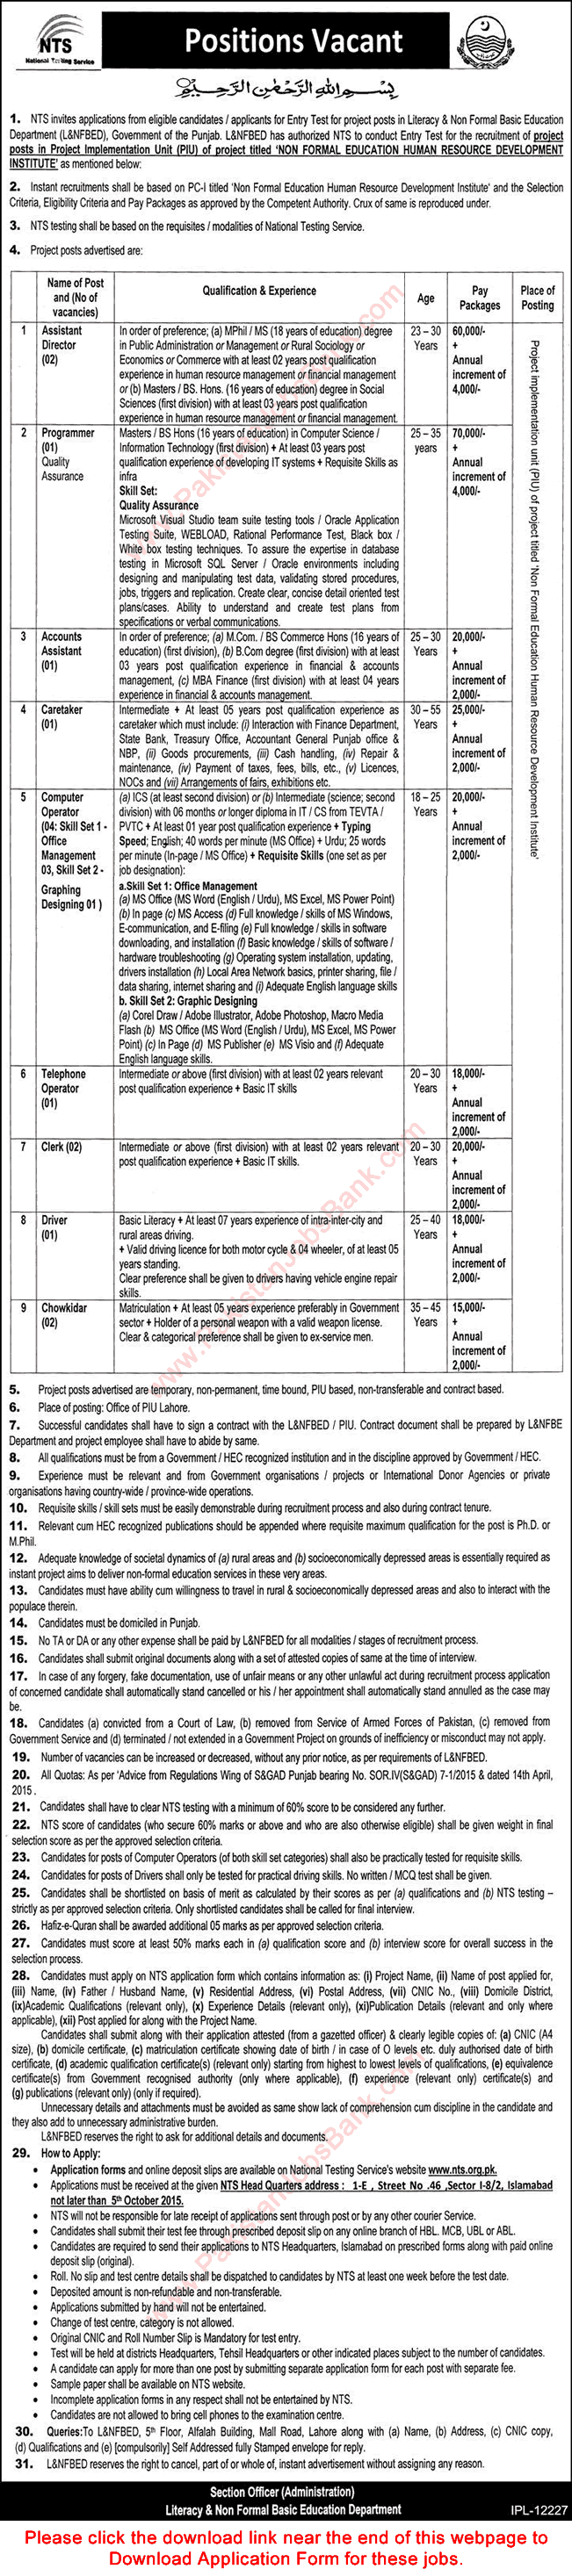 Literacy Department Punjab Jobs 2015 September NTS Application Form Computer Operator, Clerks & Others